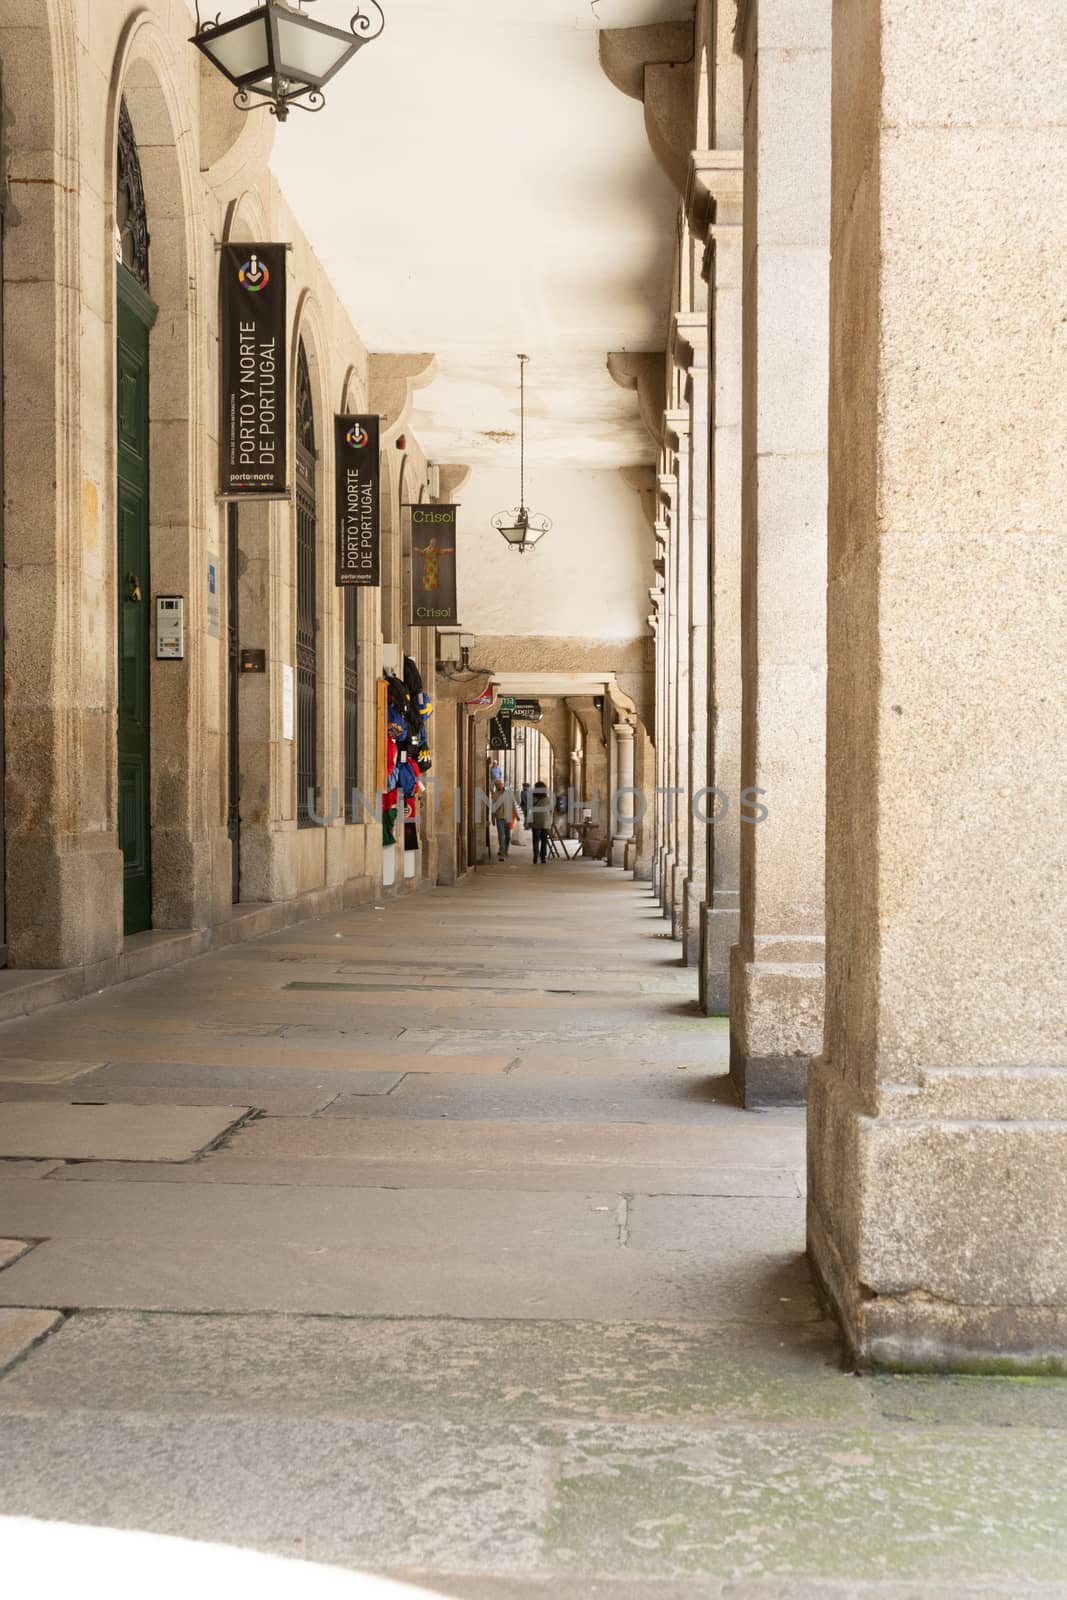 Santiago de Compostela, Spain, May 2018: View on the arcade streets of the old town of Santiago de Compostela in Spain